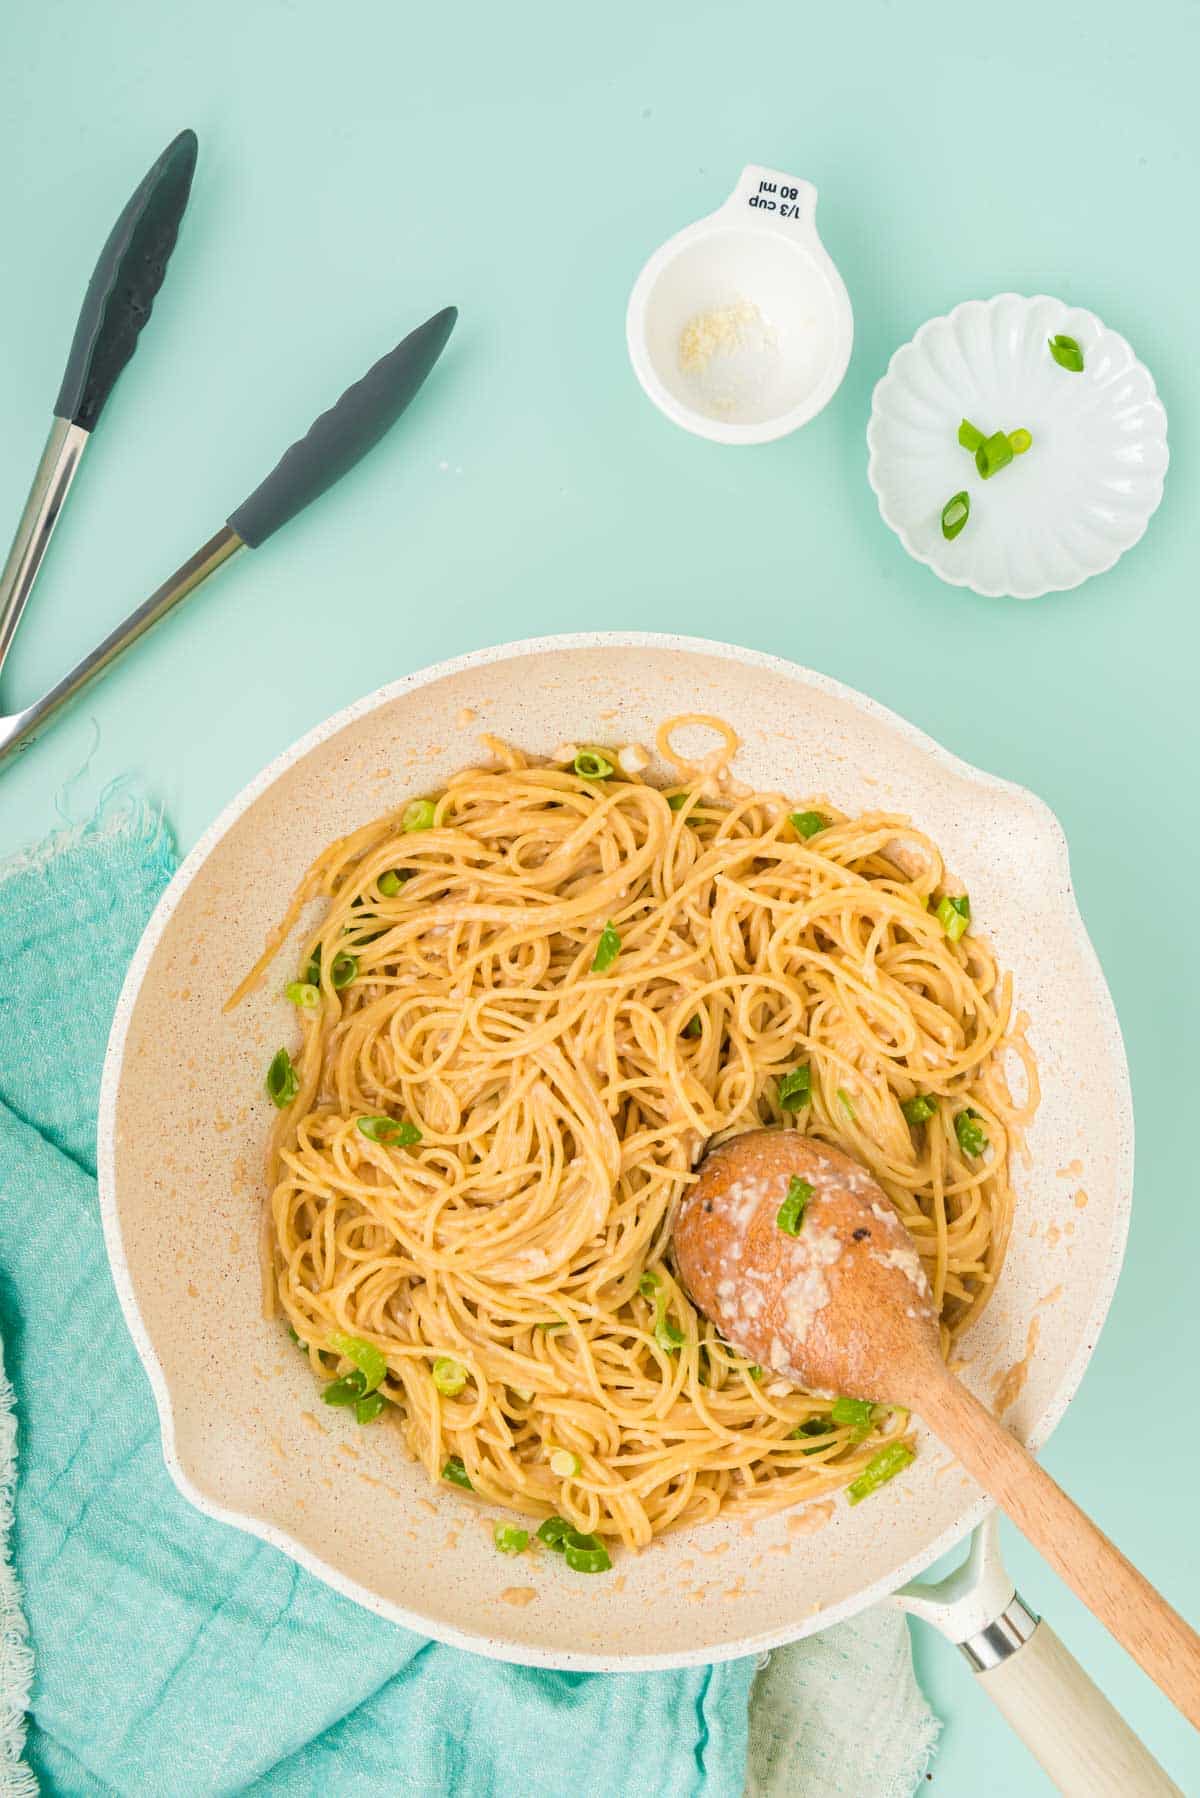 Garlic noodles in a wok with a wooden spoon on a blue surface.